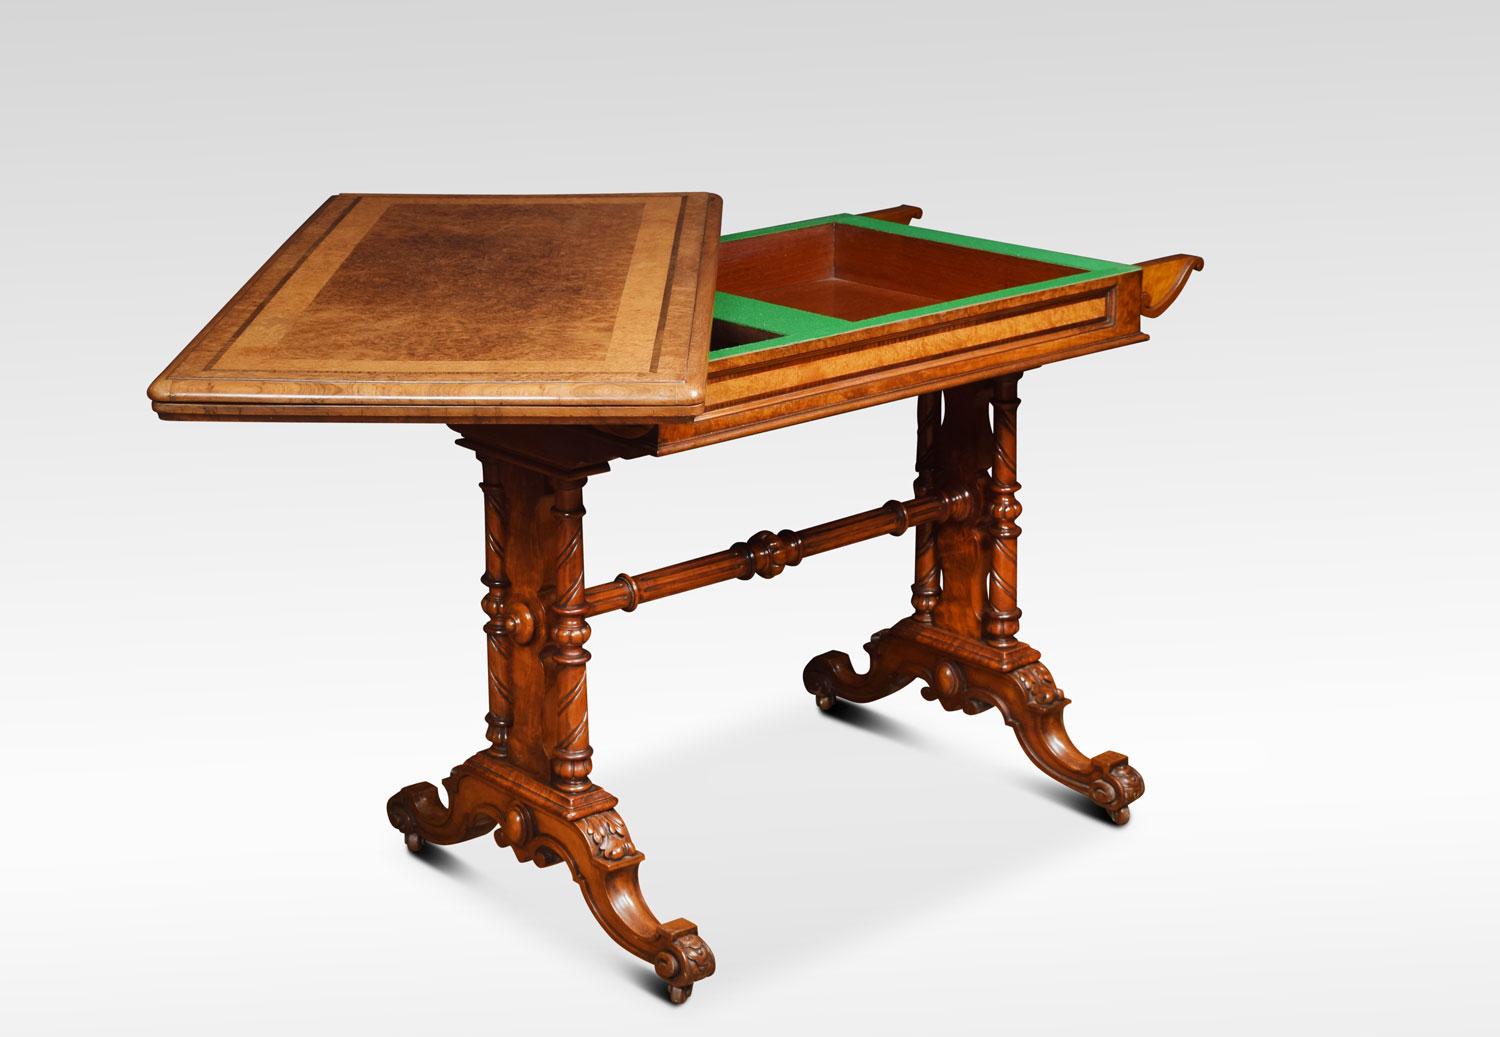 Burr walnut and amboyna card table the folding strung and crossbanded large rectangular top opens to reveal an inset tooled green leather playing surface with unusual brass hinges. All raised up on acanthus carved end supports with lobed leaf carved